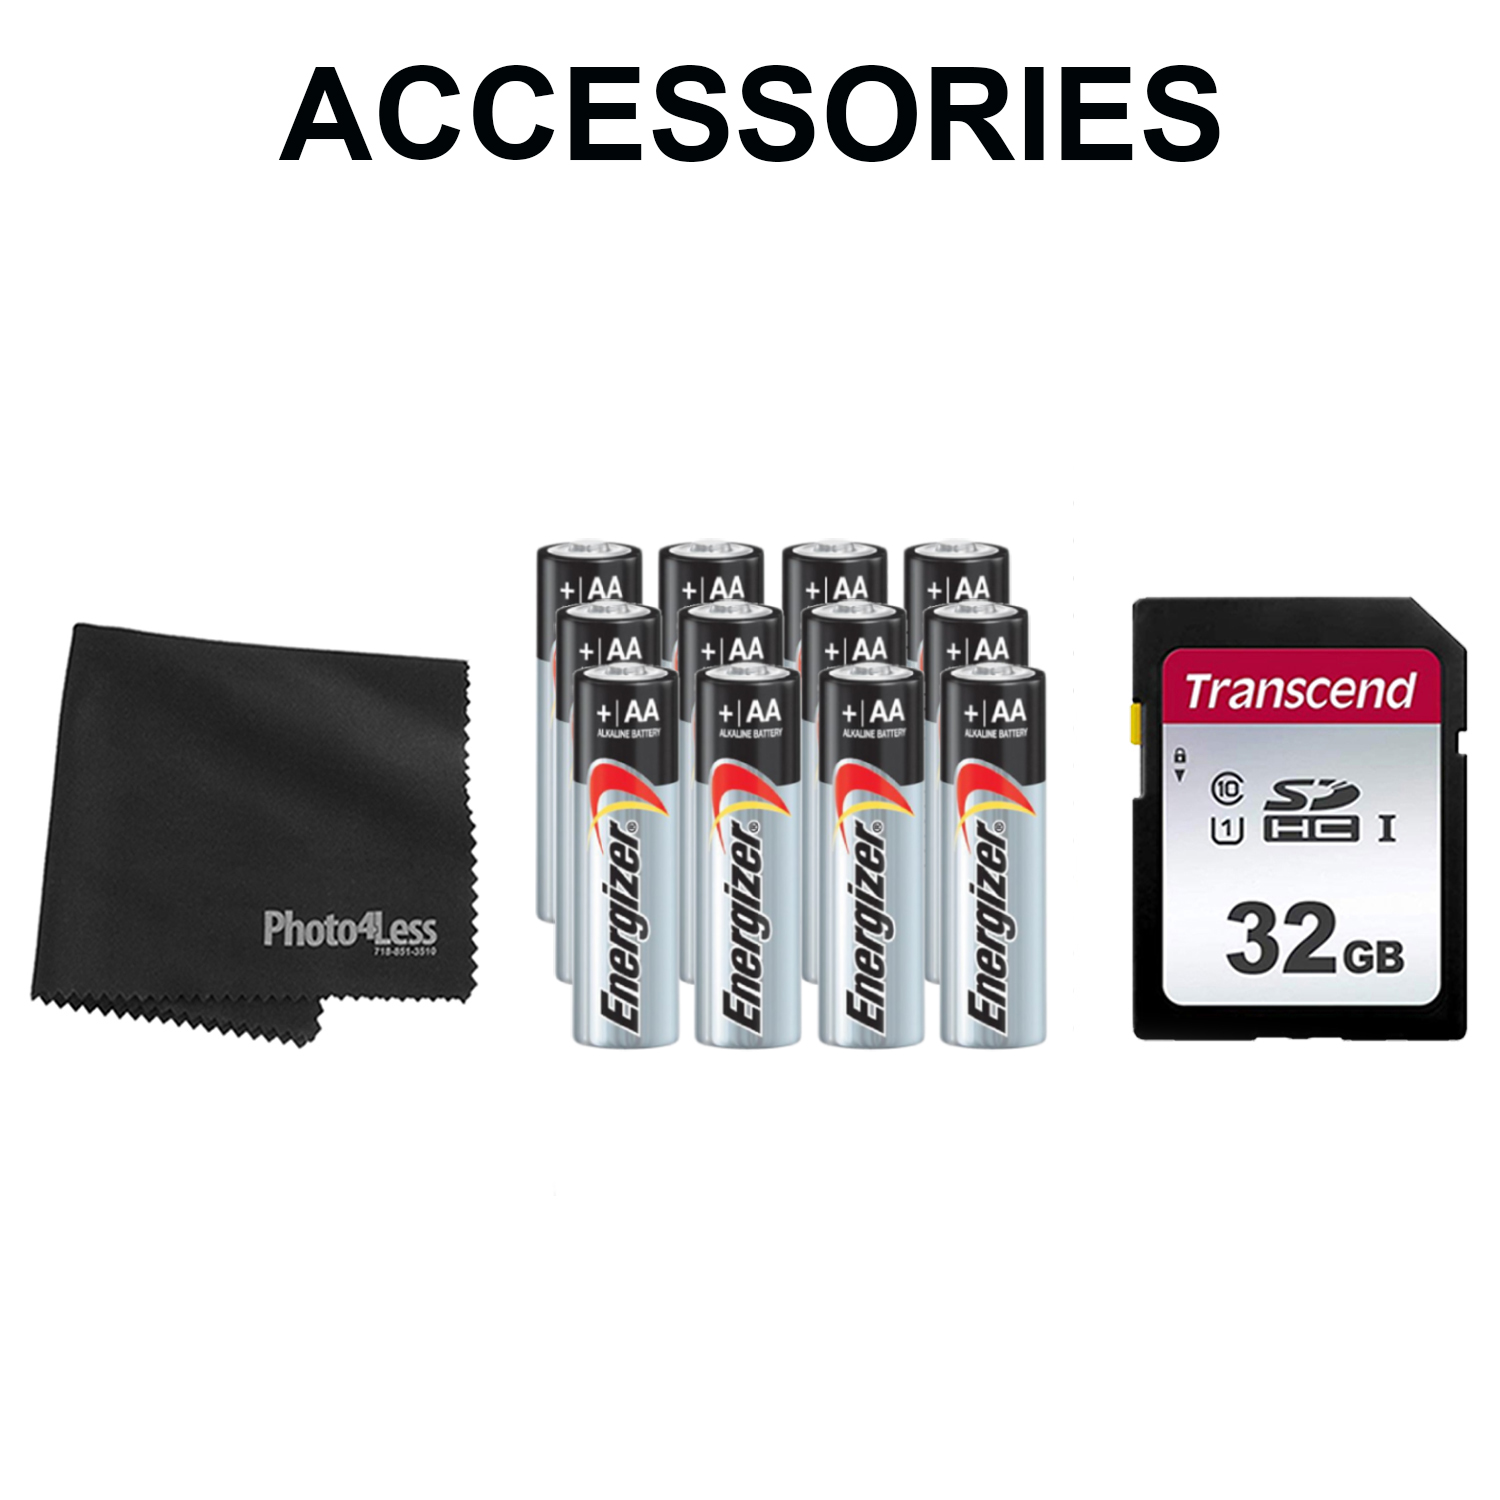 32GB SD Card Batteries & Cloth Bushnell Impulse Cellular Trail Cam 20MP AT&T 